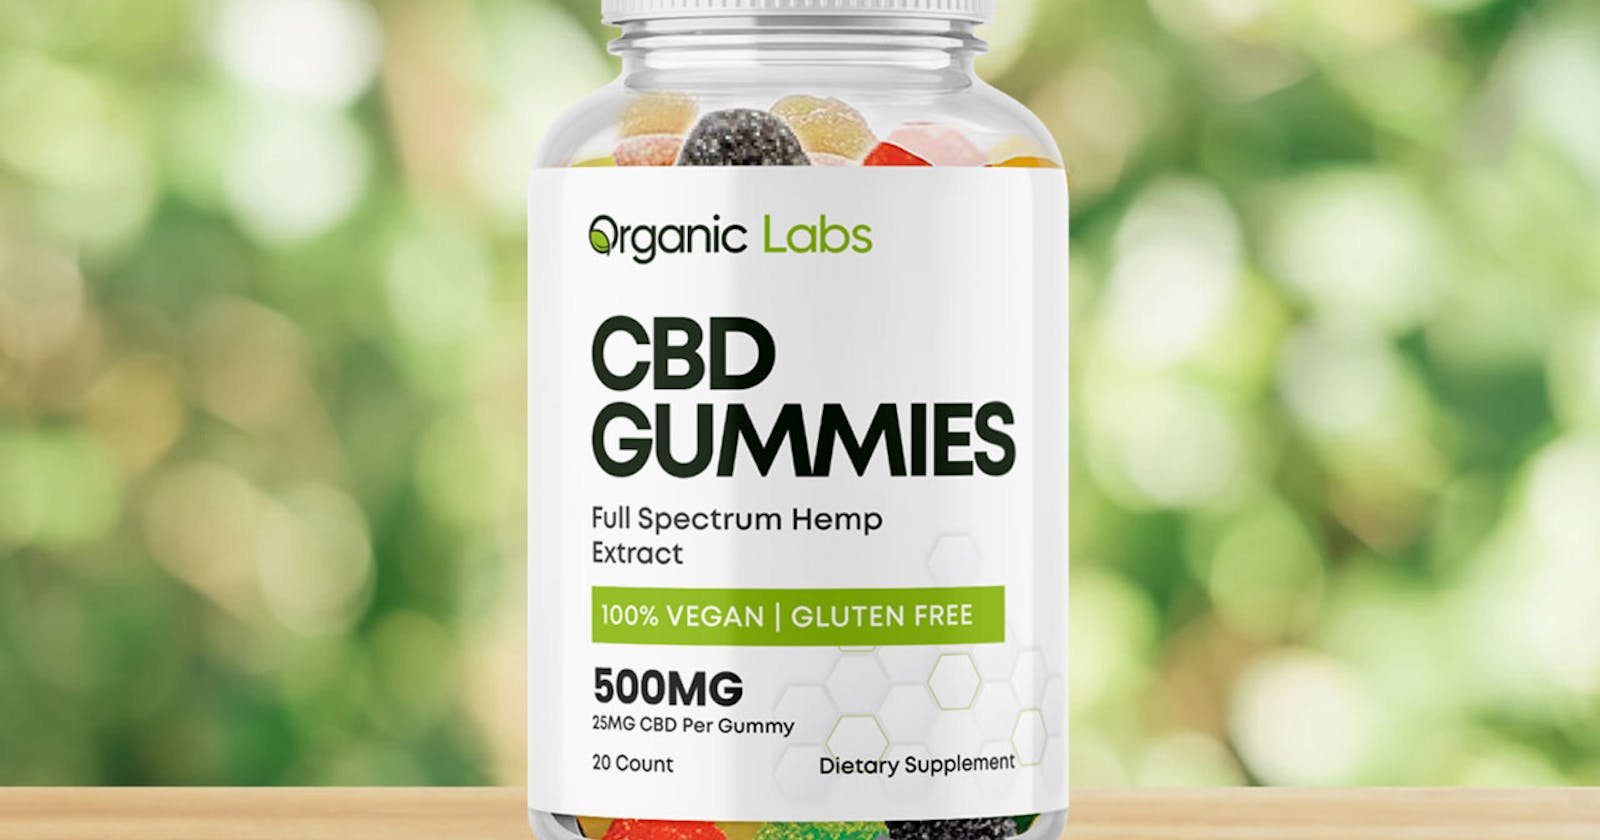 Organic Labs CBD Gummies Reviews Scam Alert! Don’t Take Before Know This